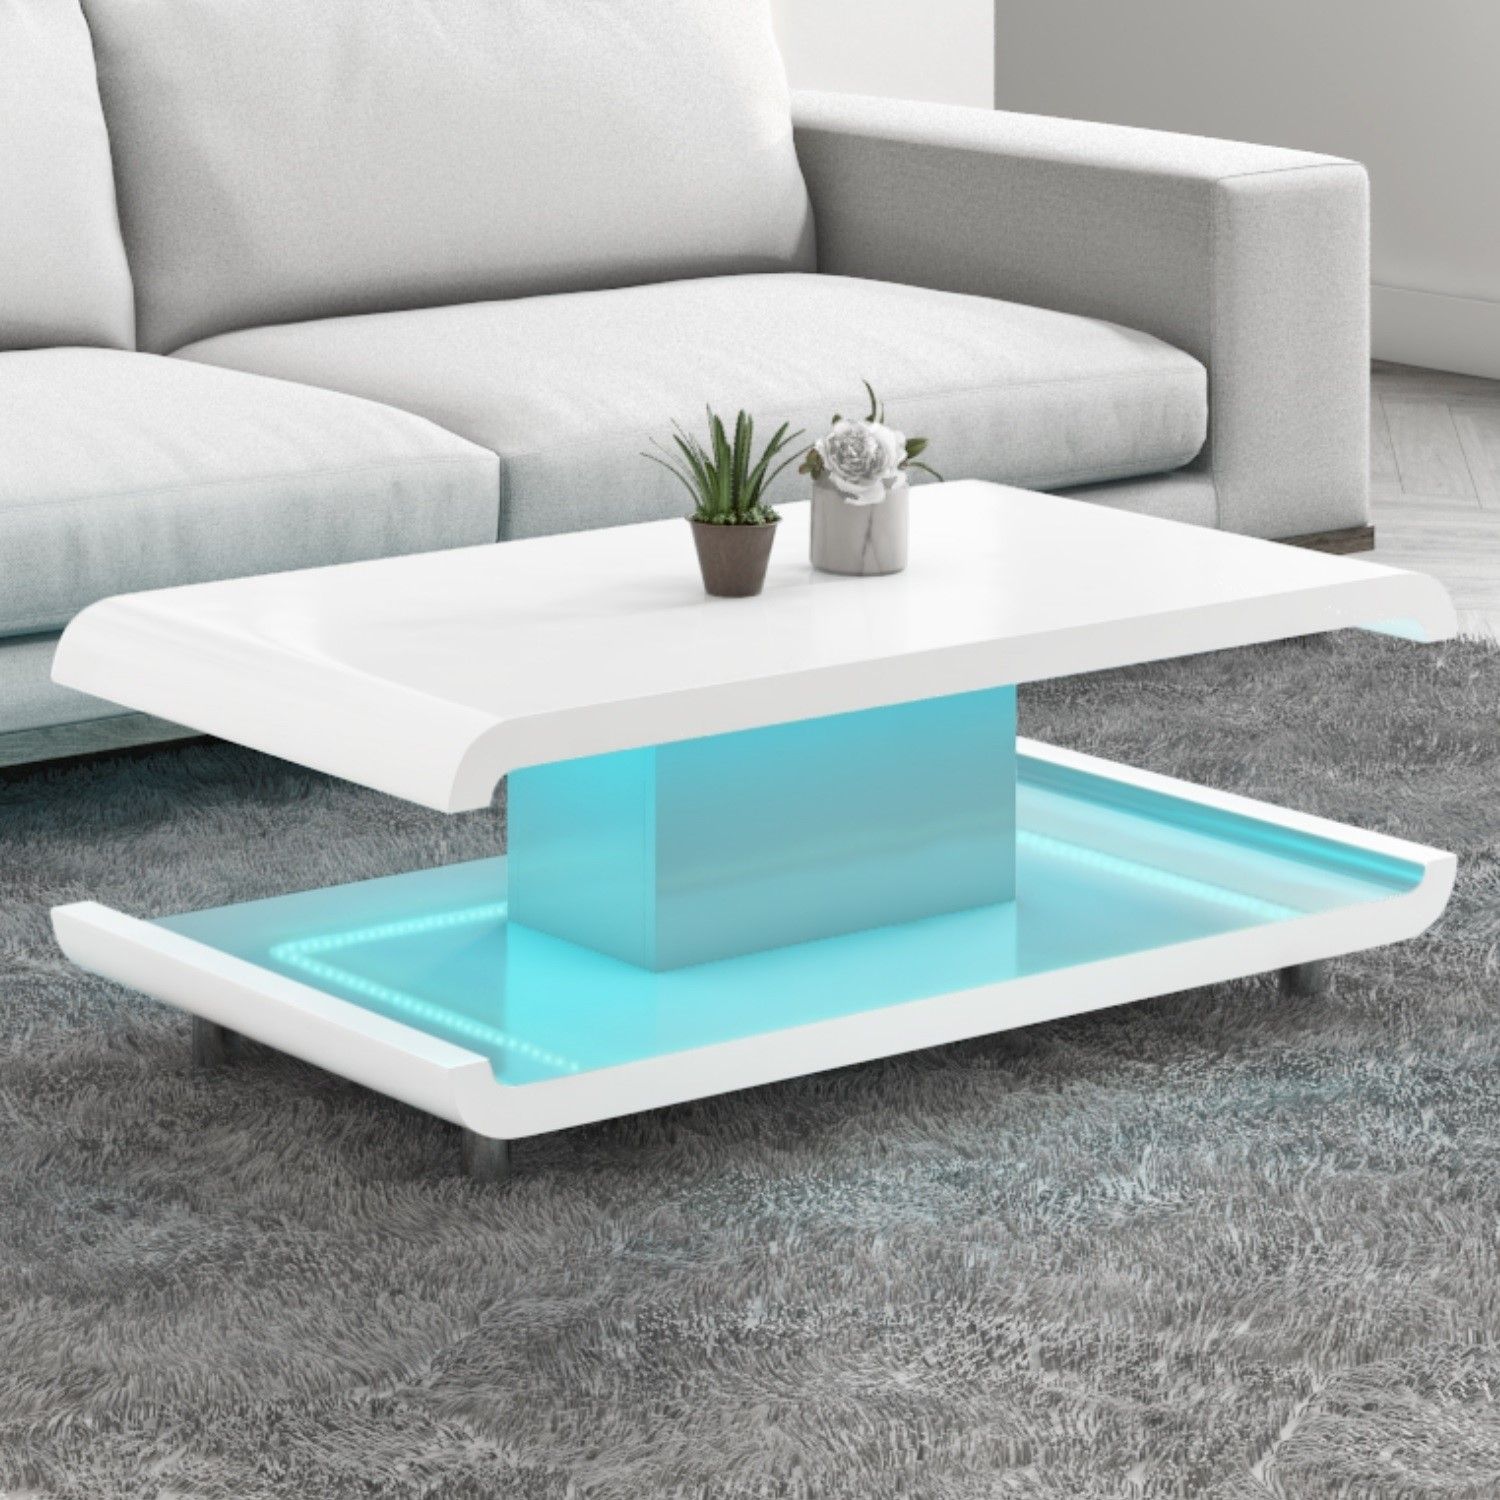 White Coffee Table With Led Lights / High Gloss White Coffee Table With In Rectangular Led Coffee Tables (View 7 of 20)